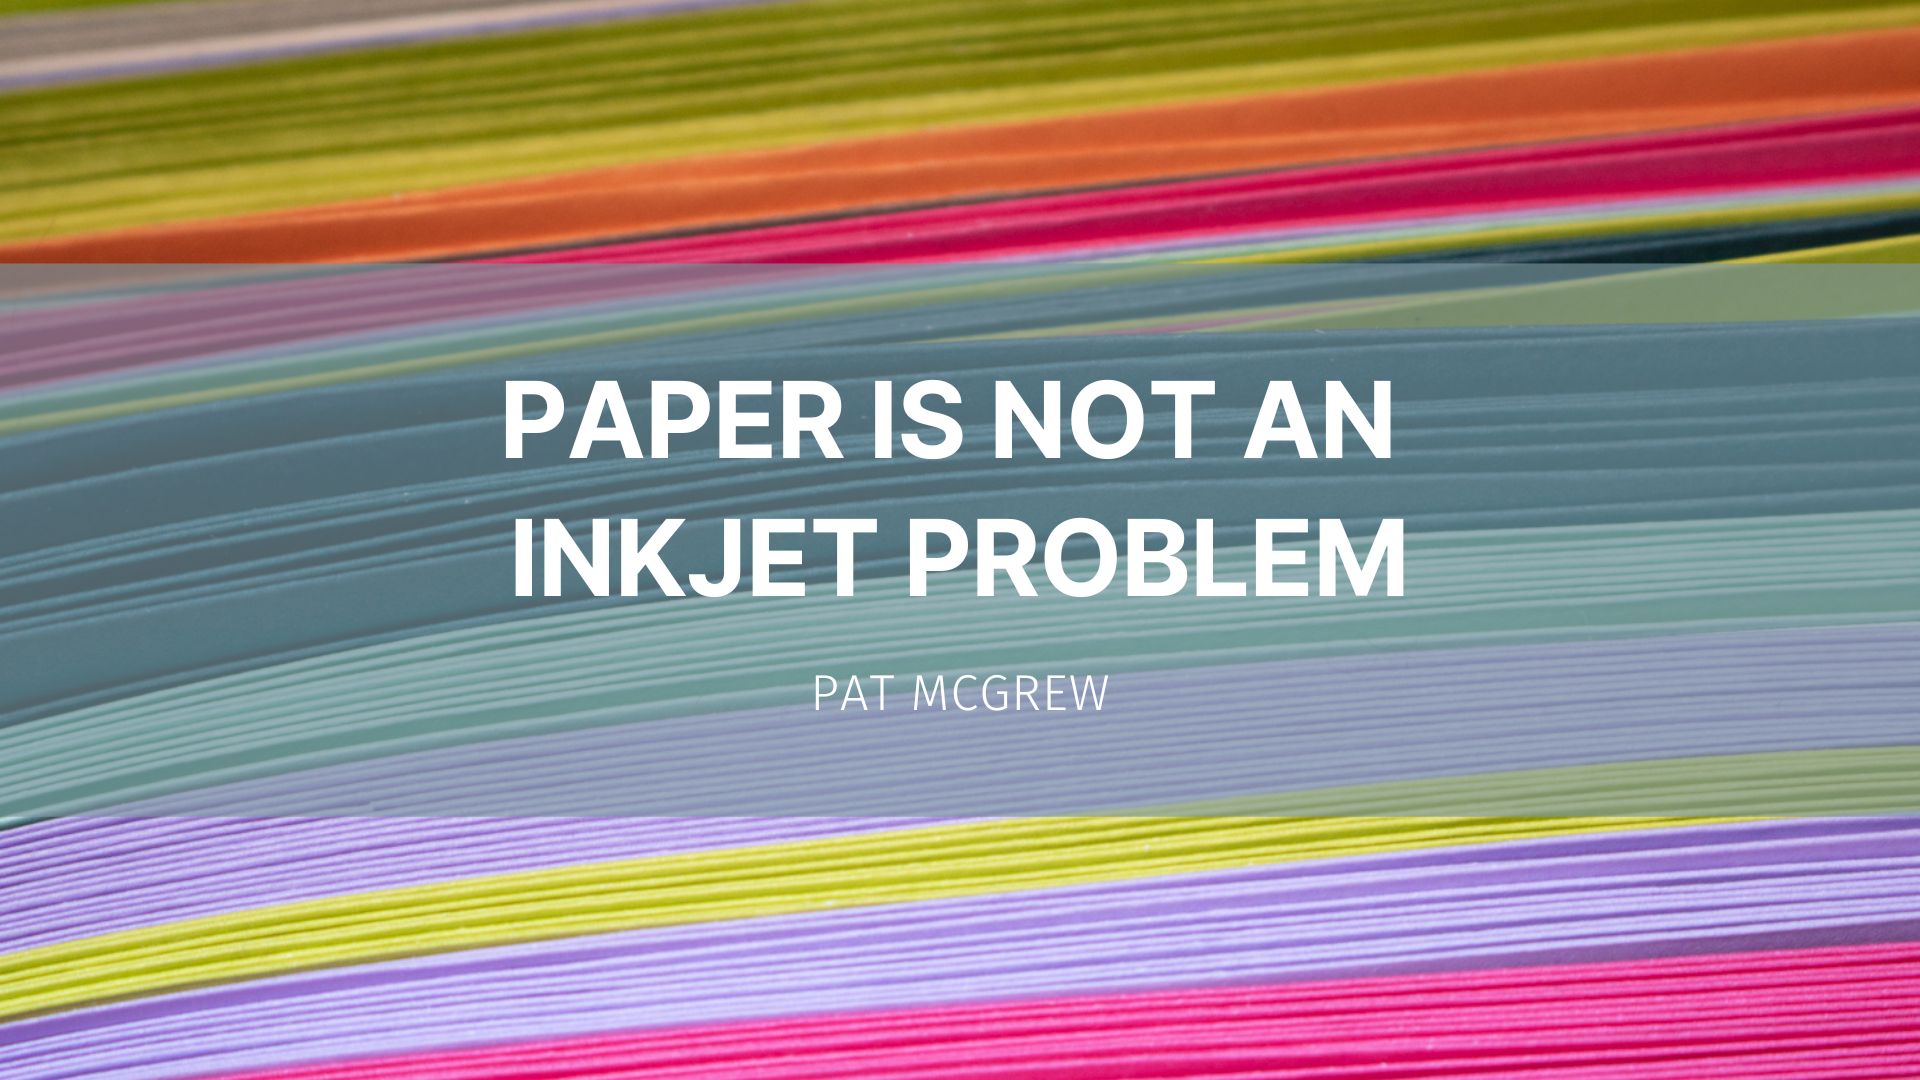 Featured image for “Paper is Not an Inkjet Problem”